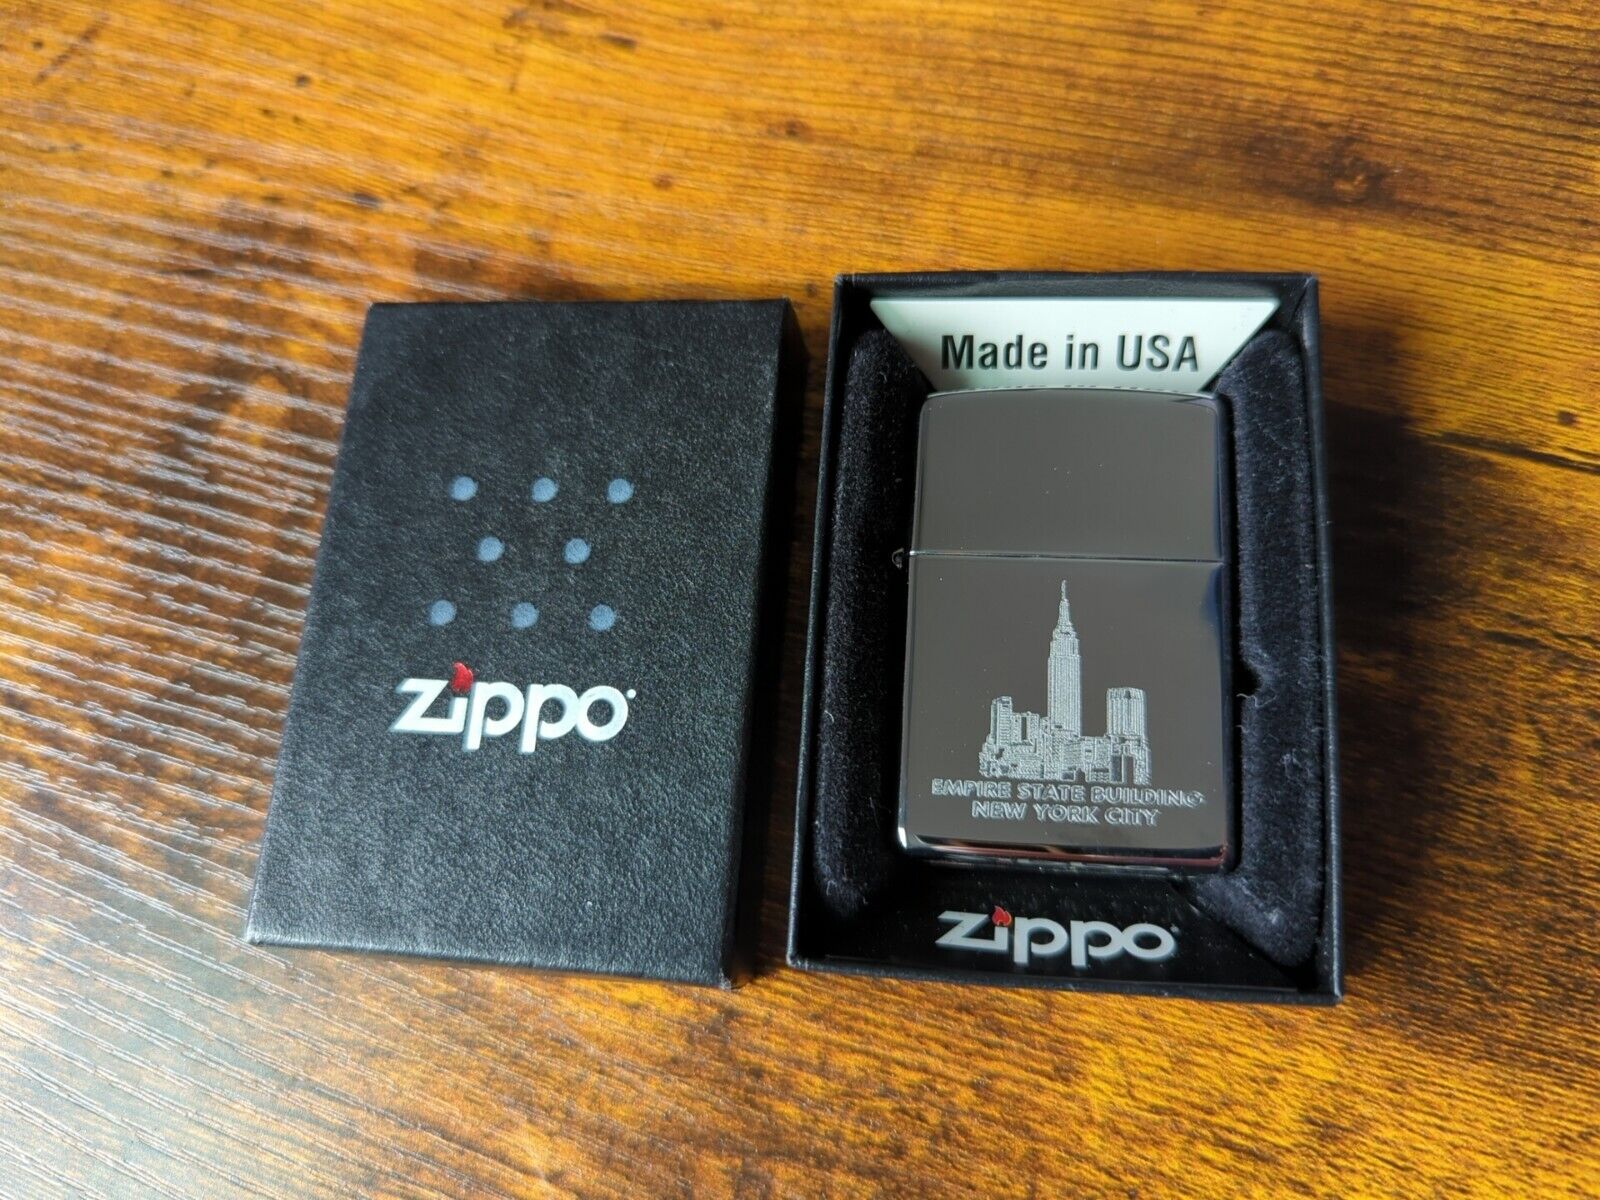 Zippo 2010 Empire State Building New York City Lighter with Box - Unfired